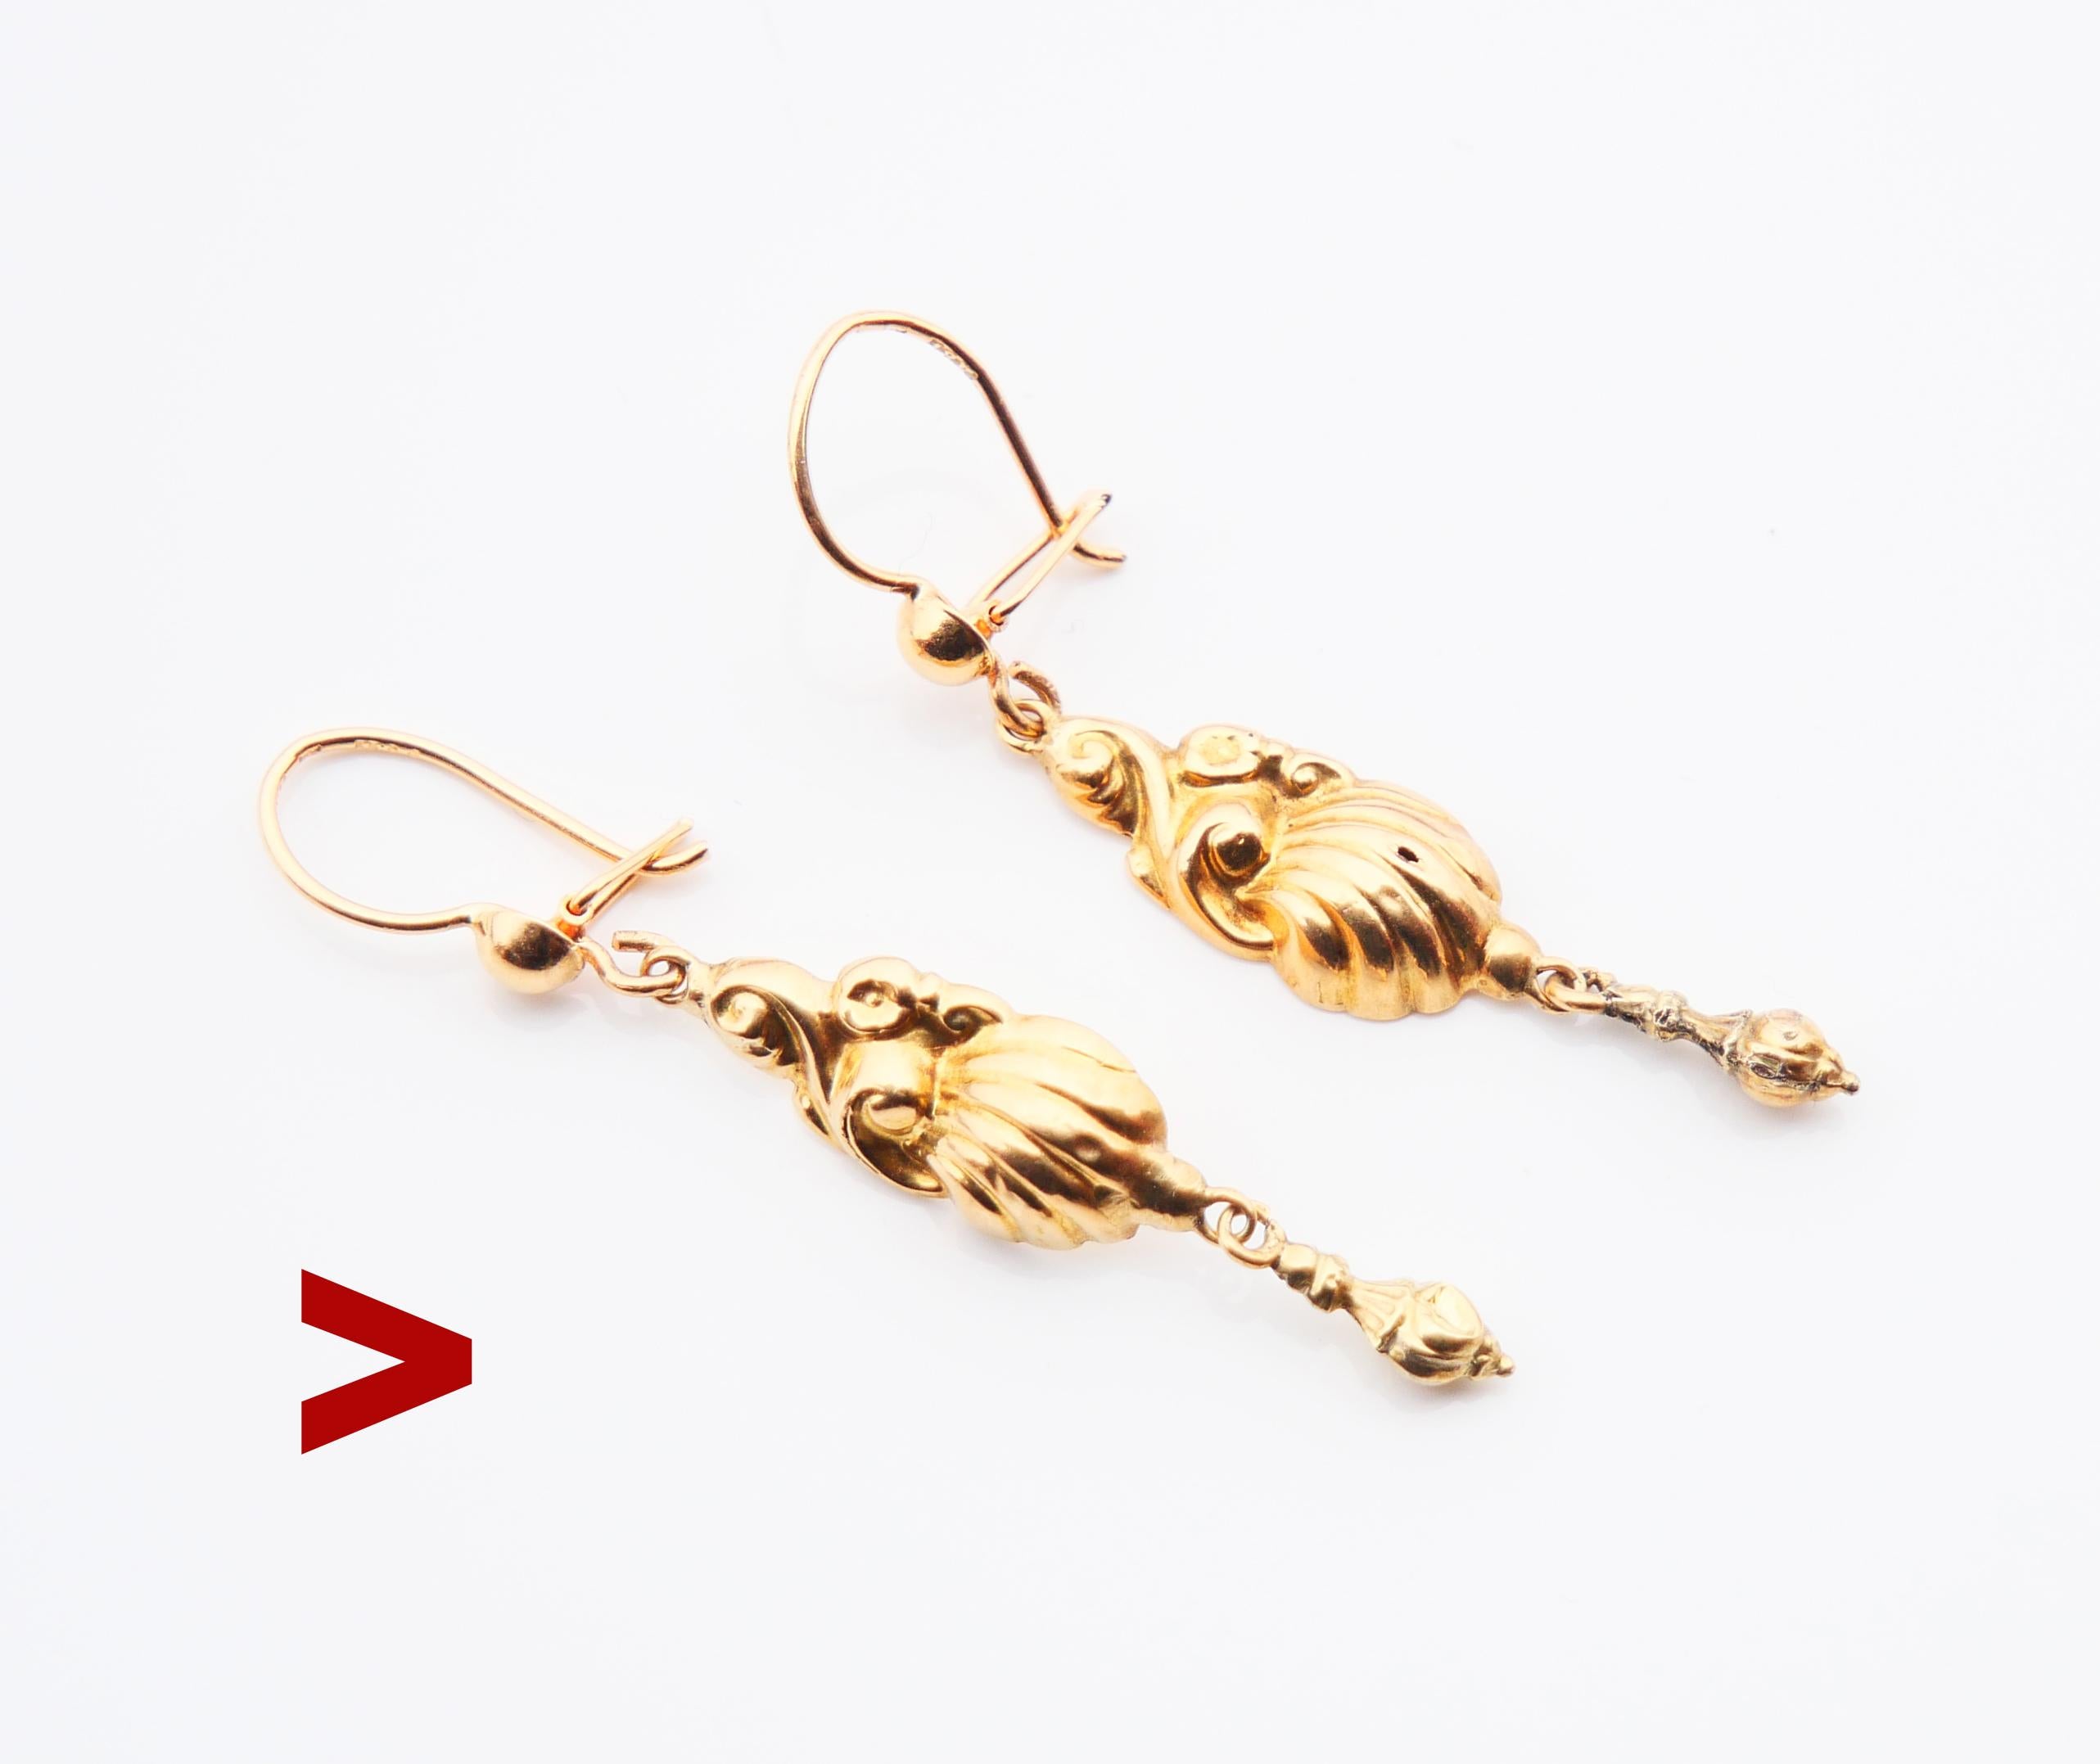 
A pair of antique fancy carved hollow dangles in solid 18K Yellow Gold with freely suspended tassel-shaped dangles.

Swedish hallmarks on both marked 18K Gold.

Maker's hallmarks are barely visible/worn. Date marks F5 = made in 1860.

Each earring